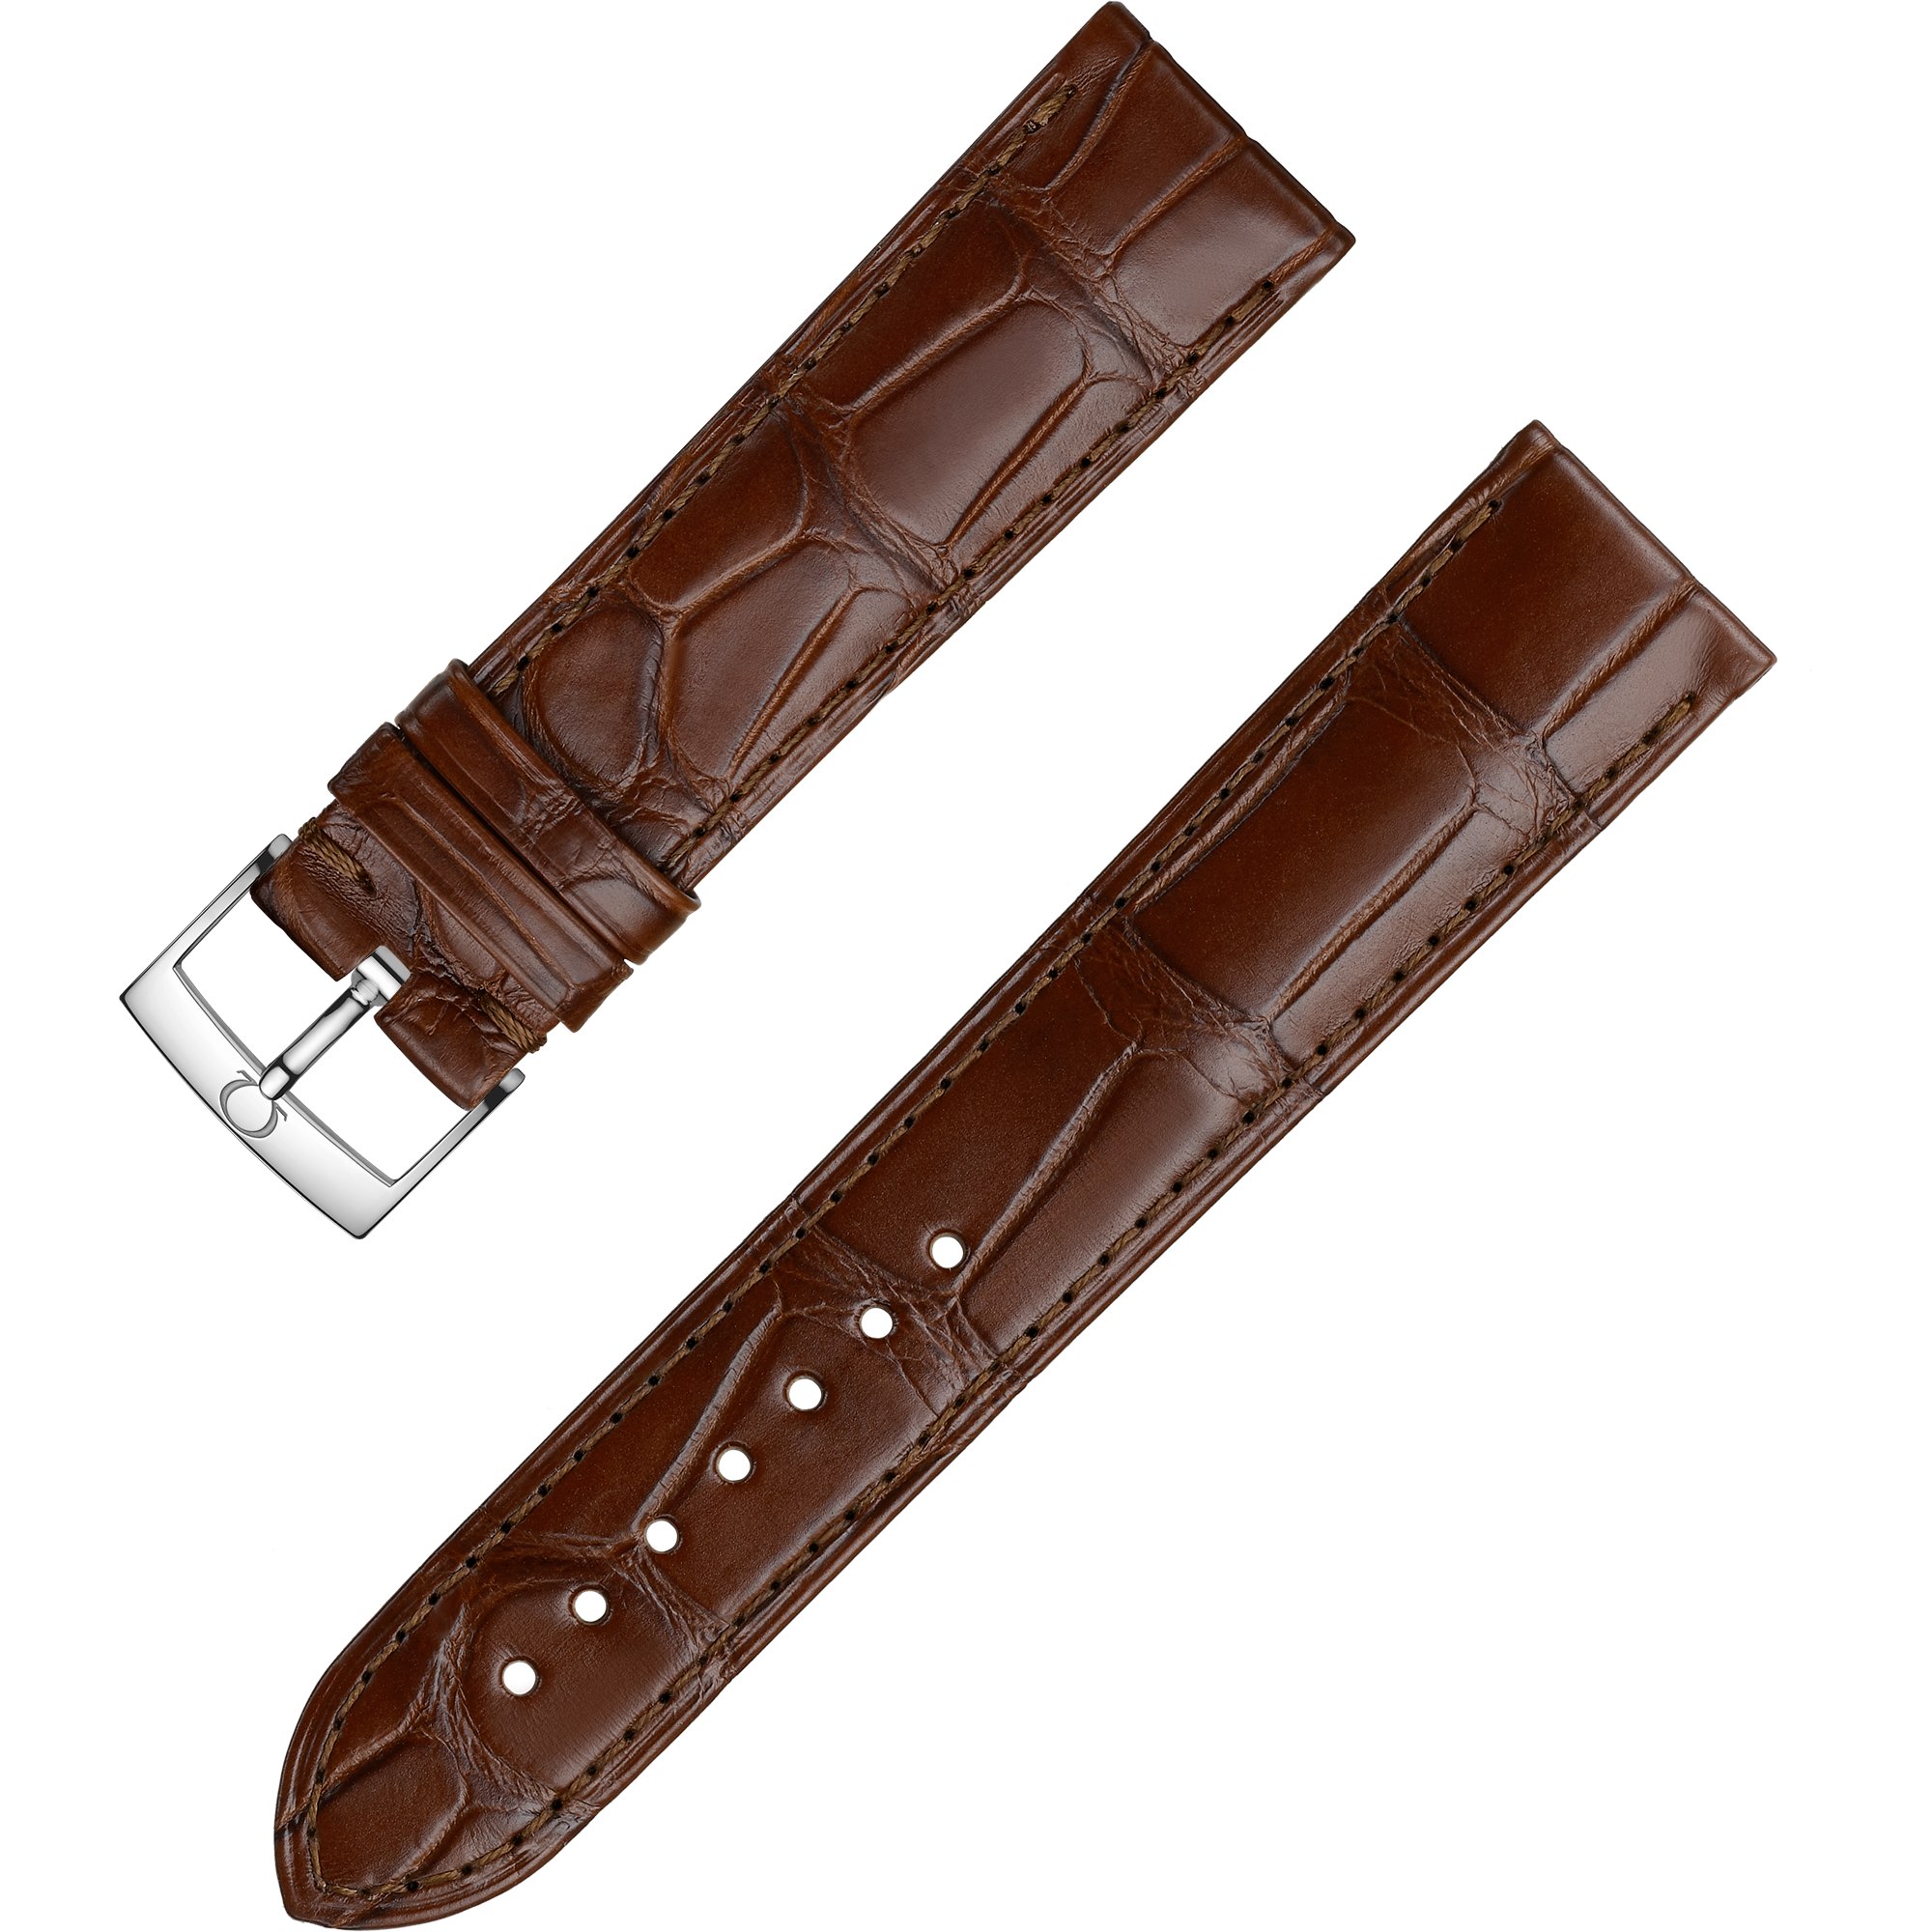 Two-piece strap - Brown alligator leather strap with pin buckle - 032CUZ010217W